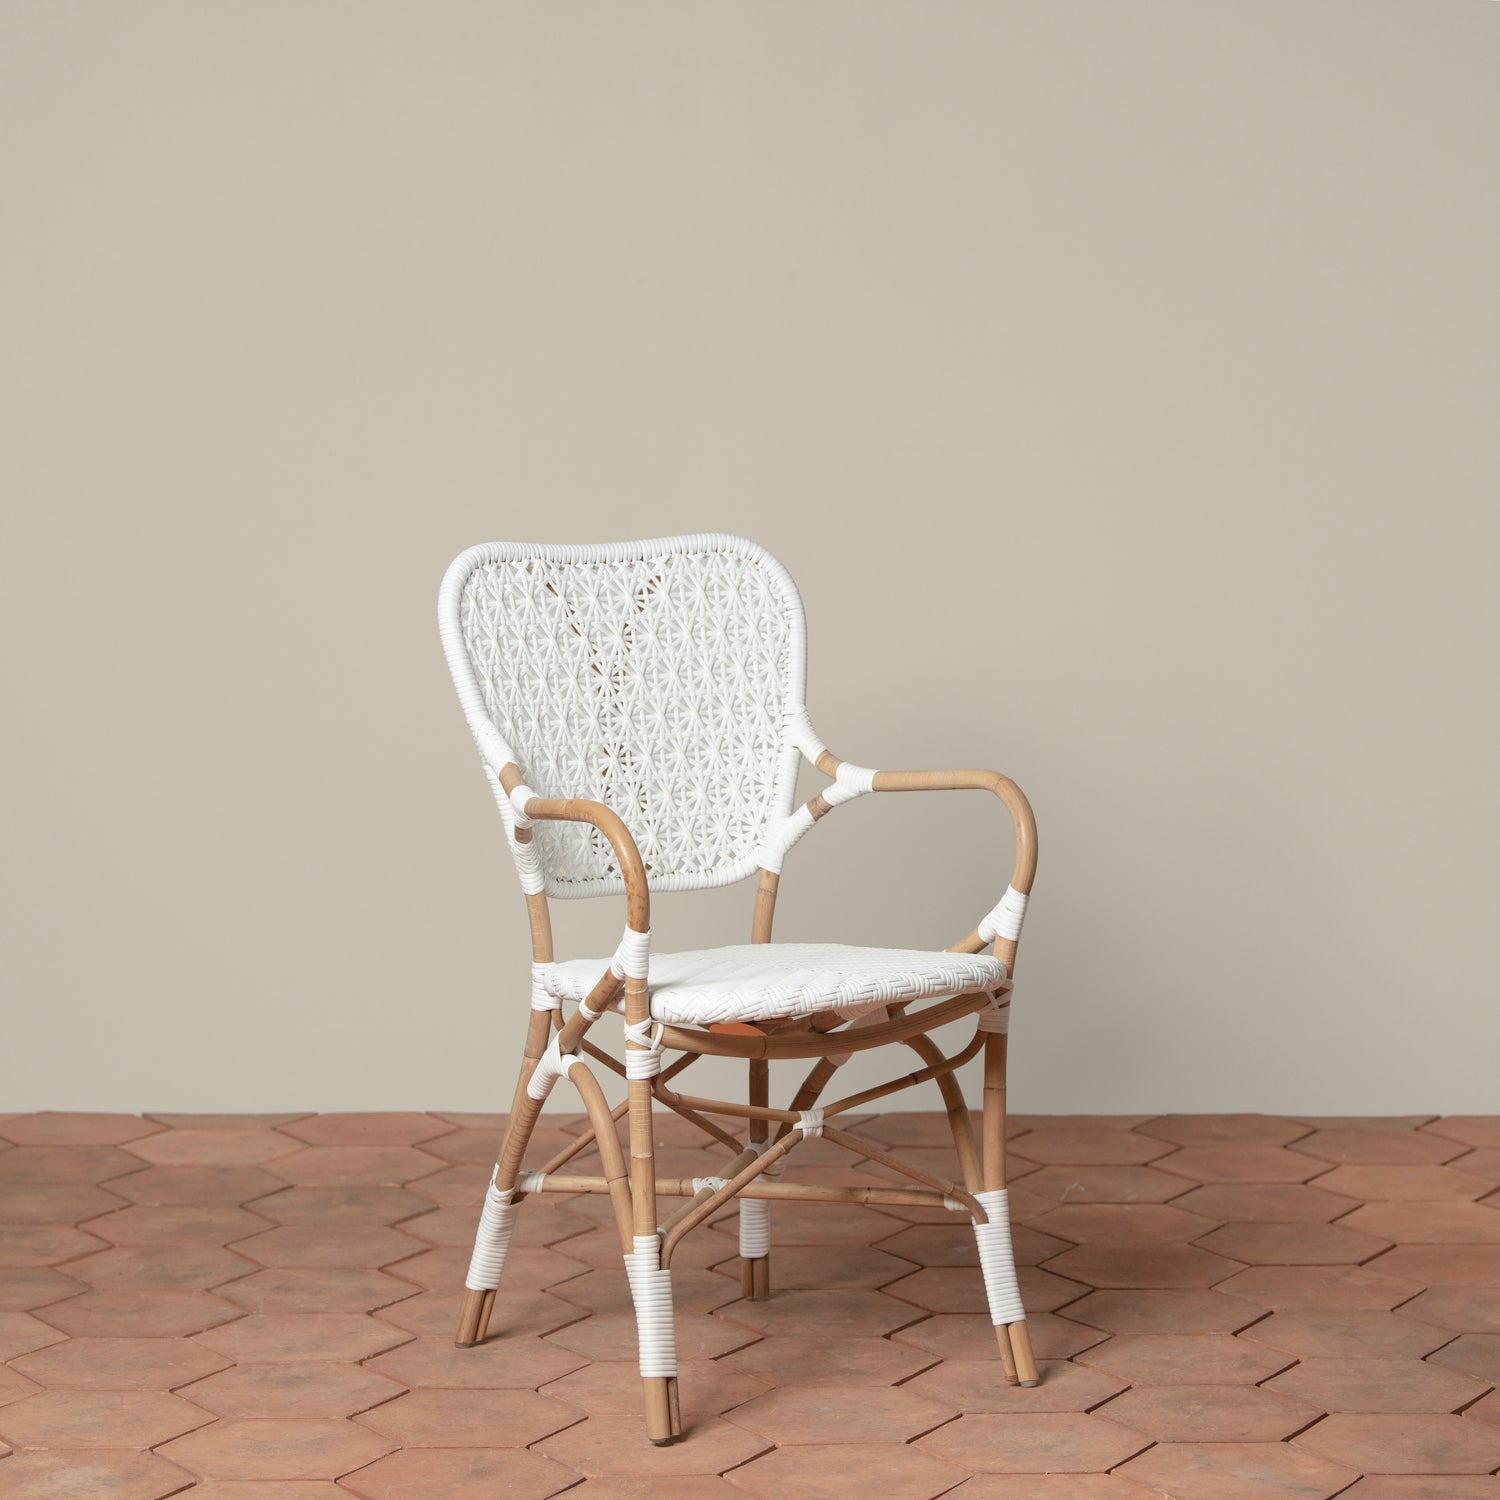 On a neutral background is a white and tan woven rattan chair with woven cane on the backrest and seat. 